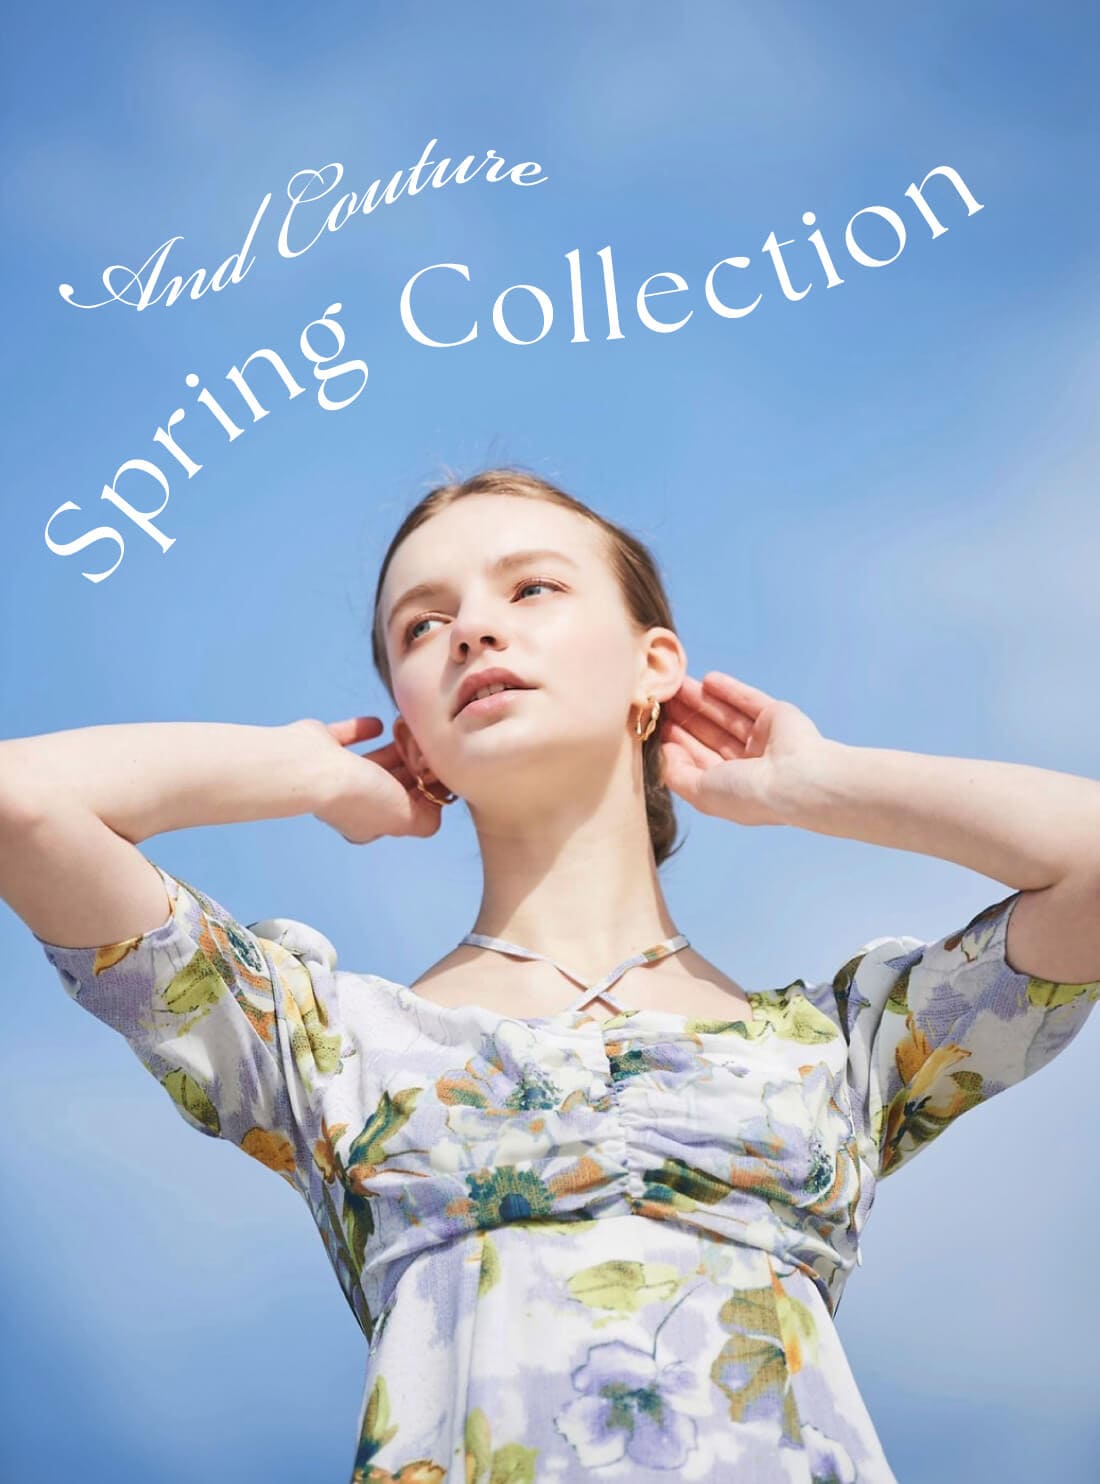 And Couture アンドクチュール Spring Collection vol.2